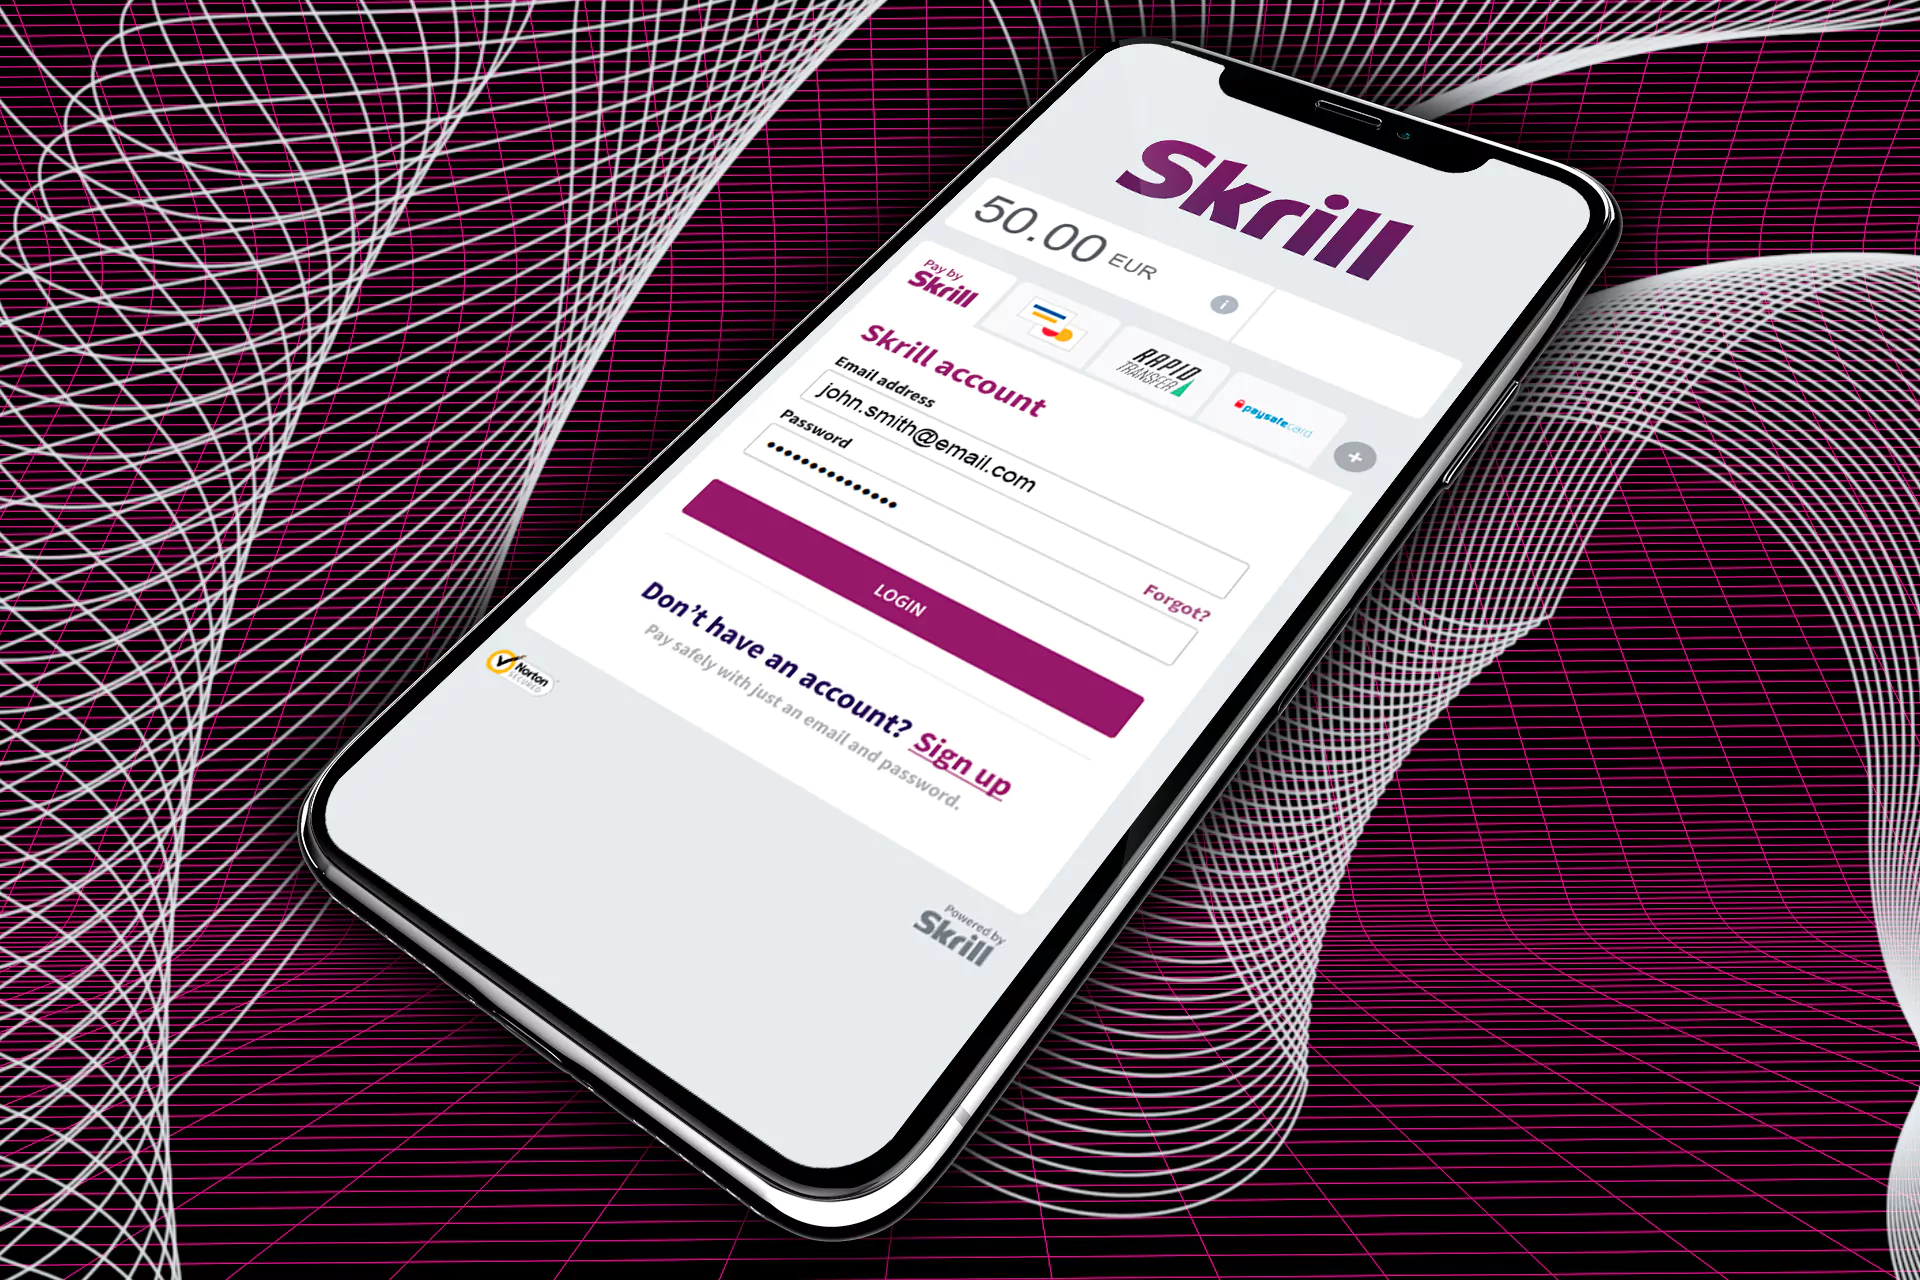 Download the Skrill app and fill in the registration form.